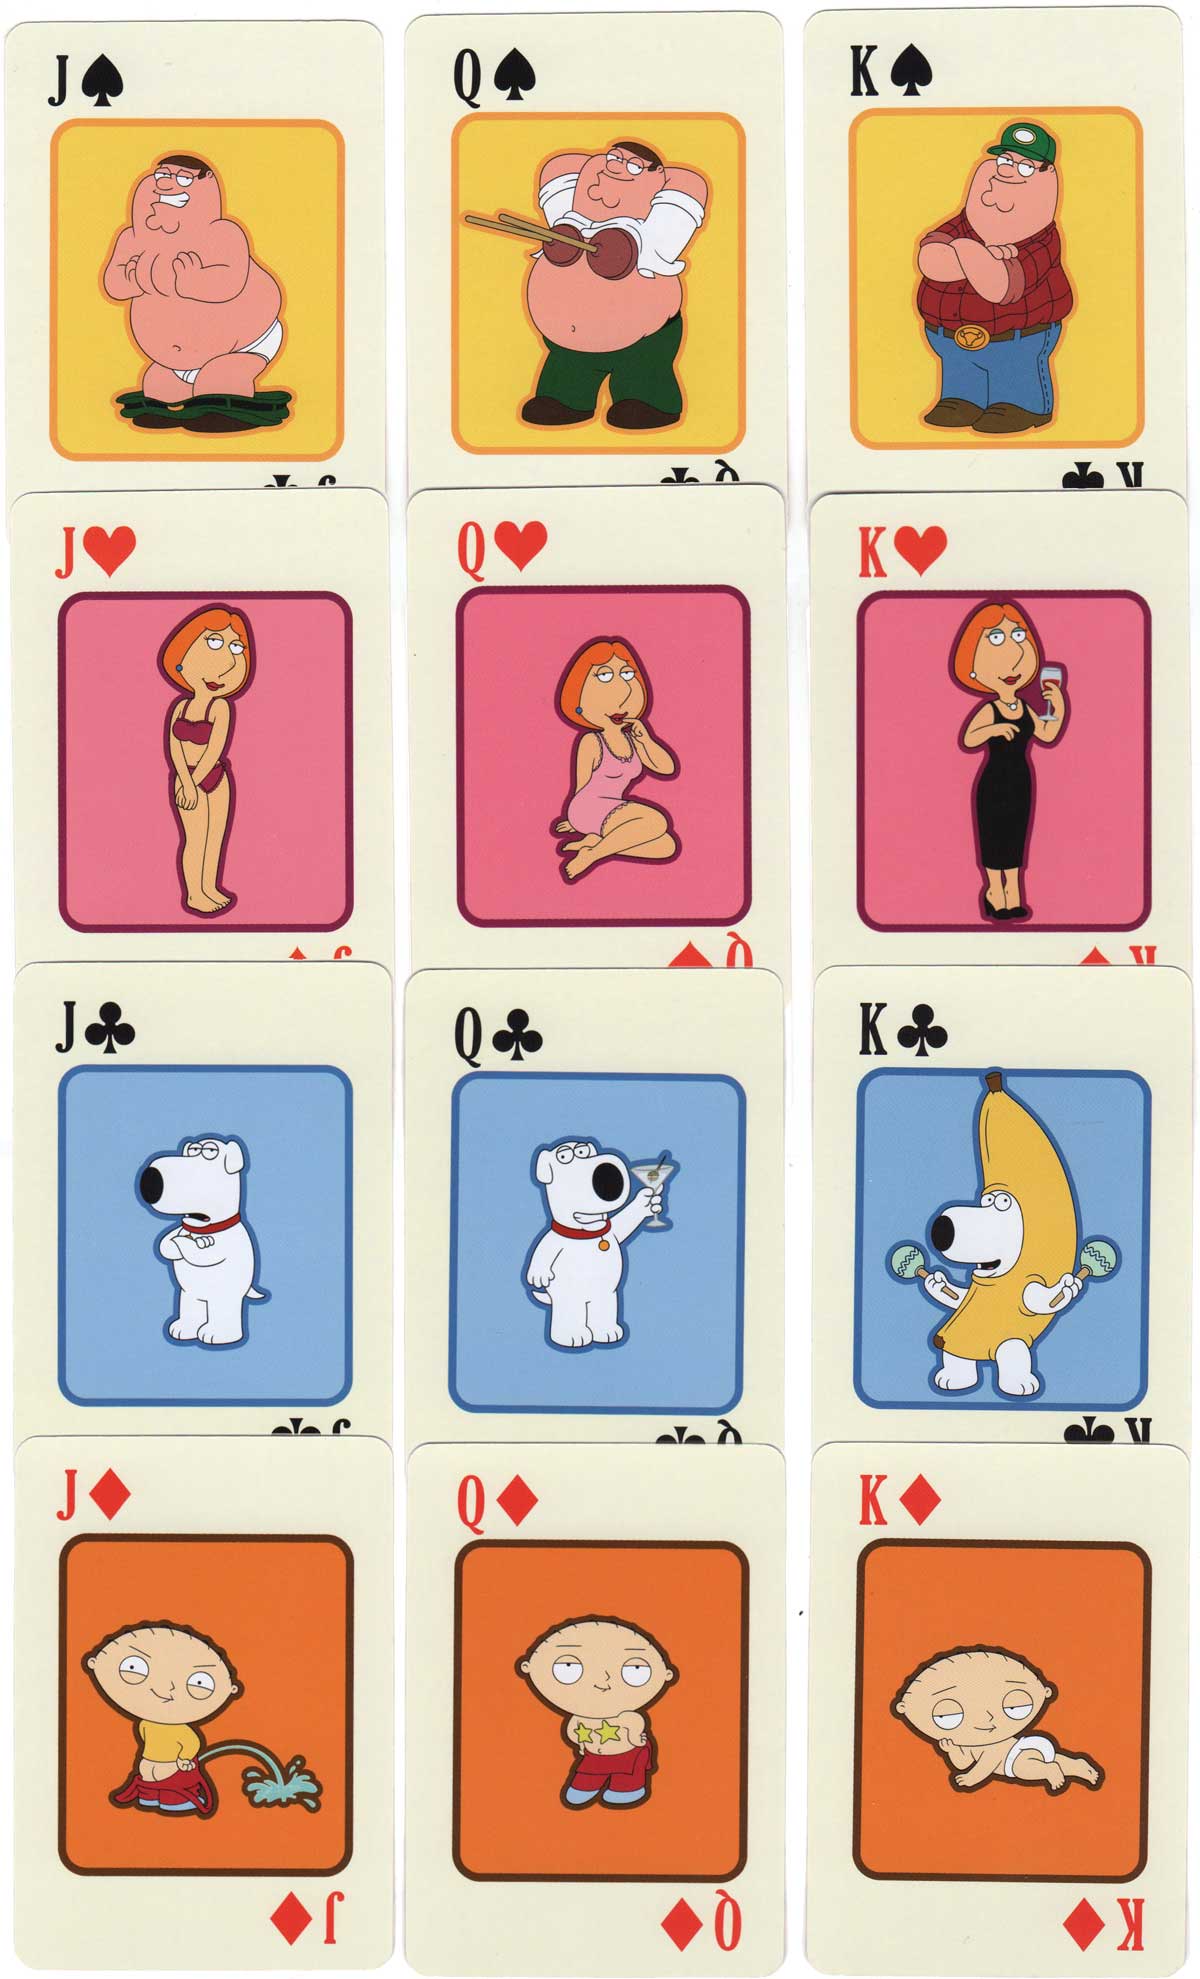 Family Guy merchandise deck licensed and copyright by Fox 2010